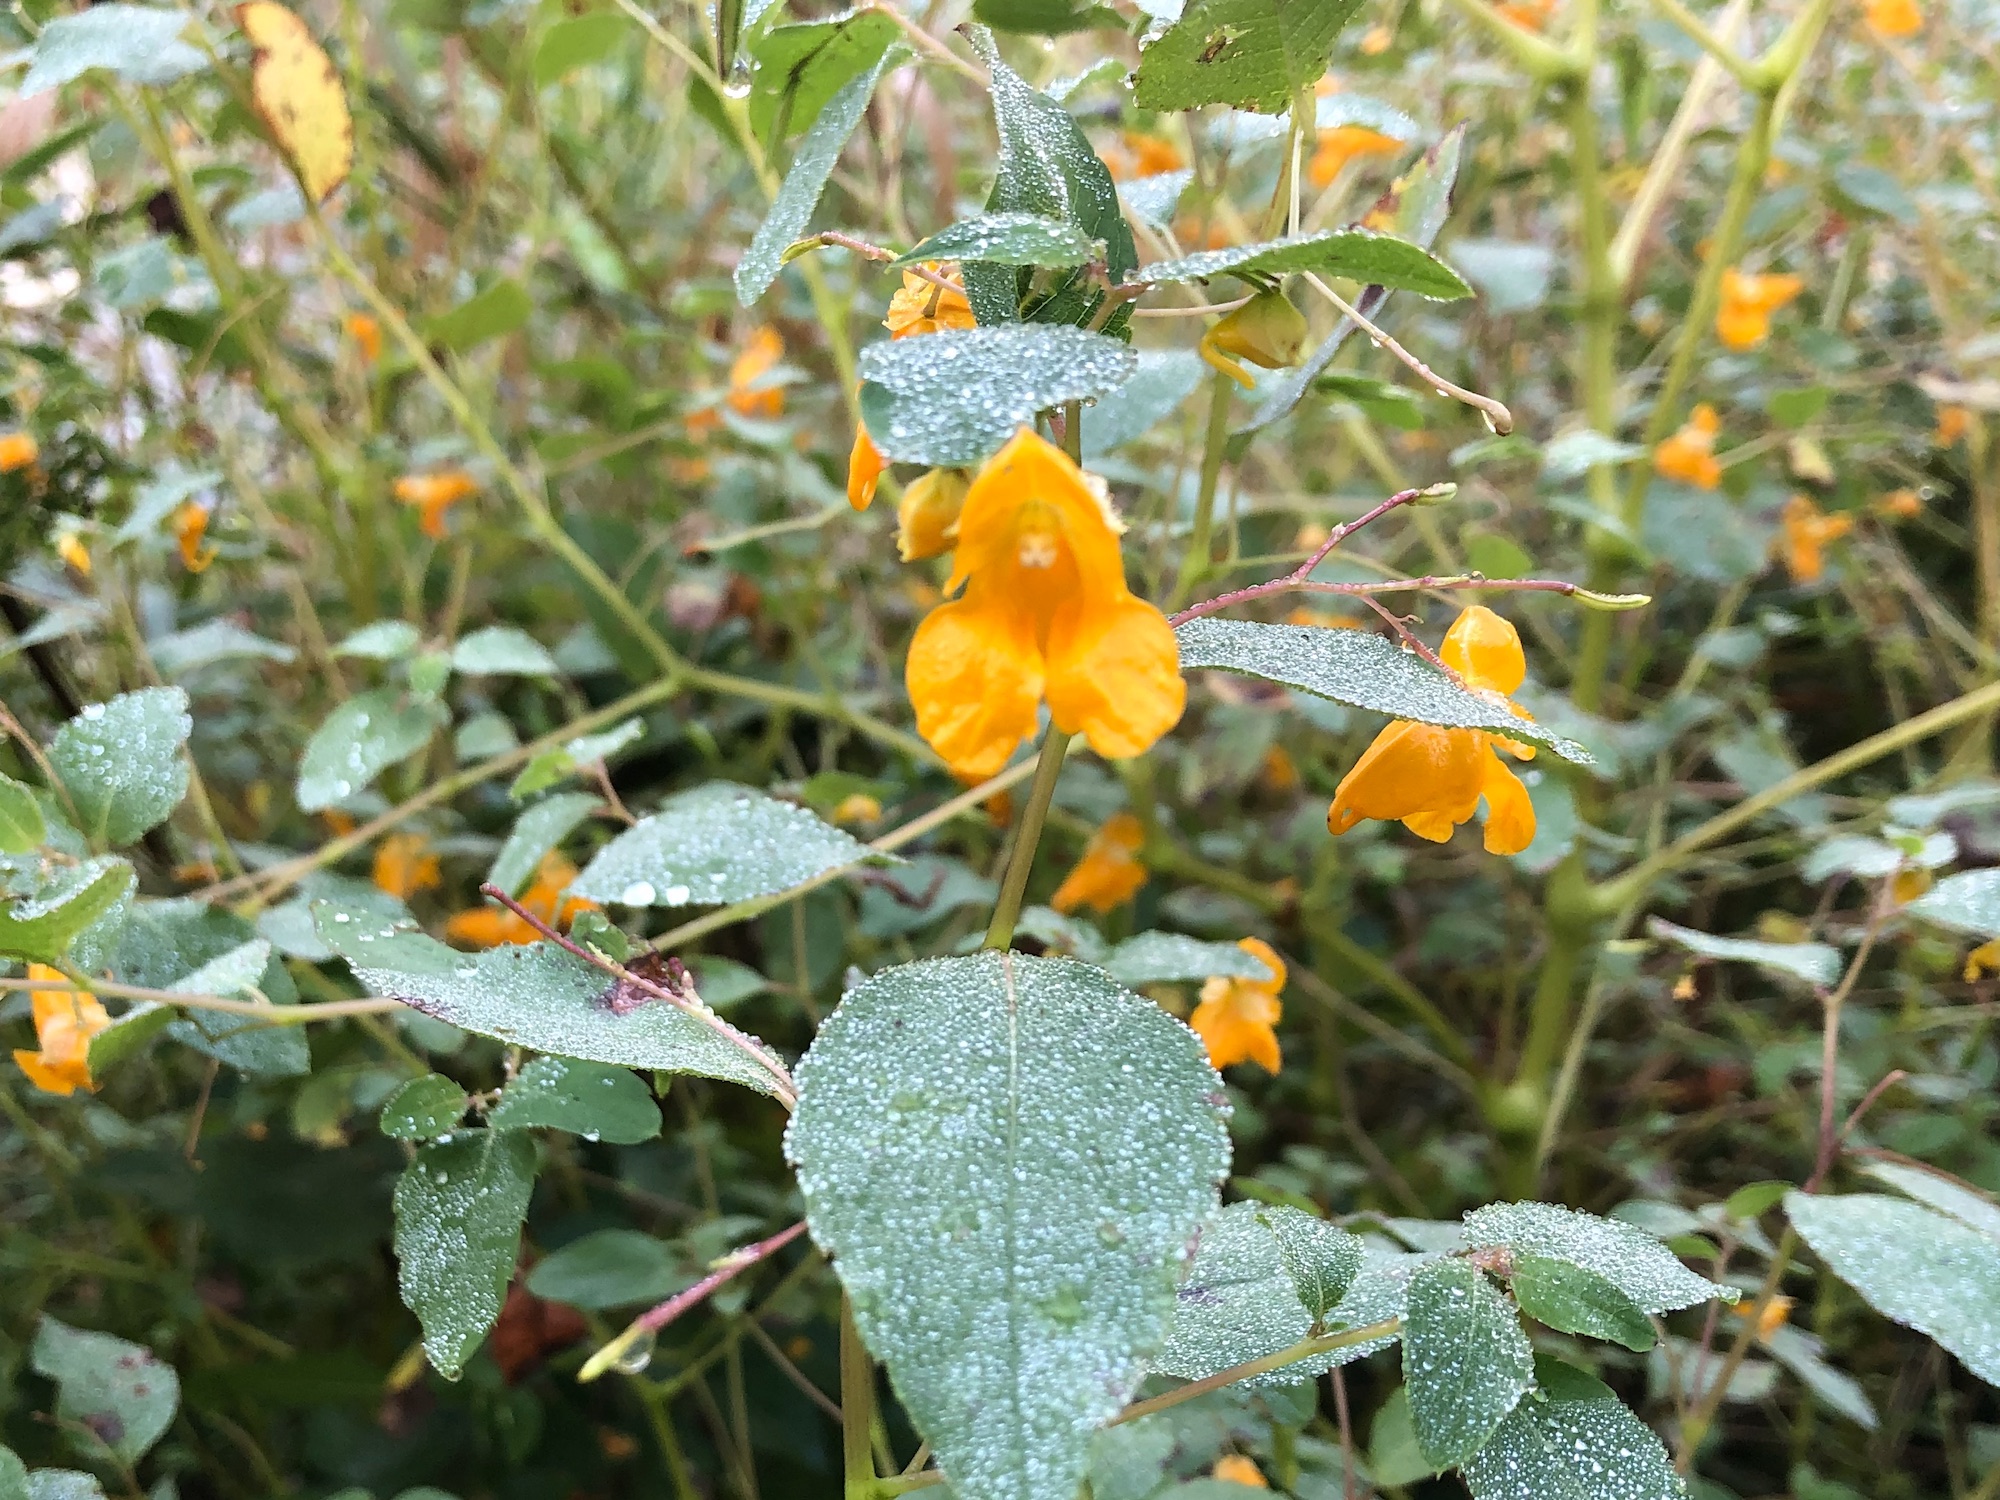 Spotted Jewelweed on shore of Duck Pond on September 7, 2019.